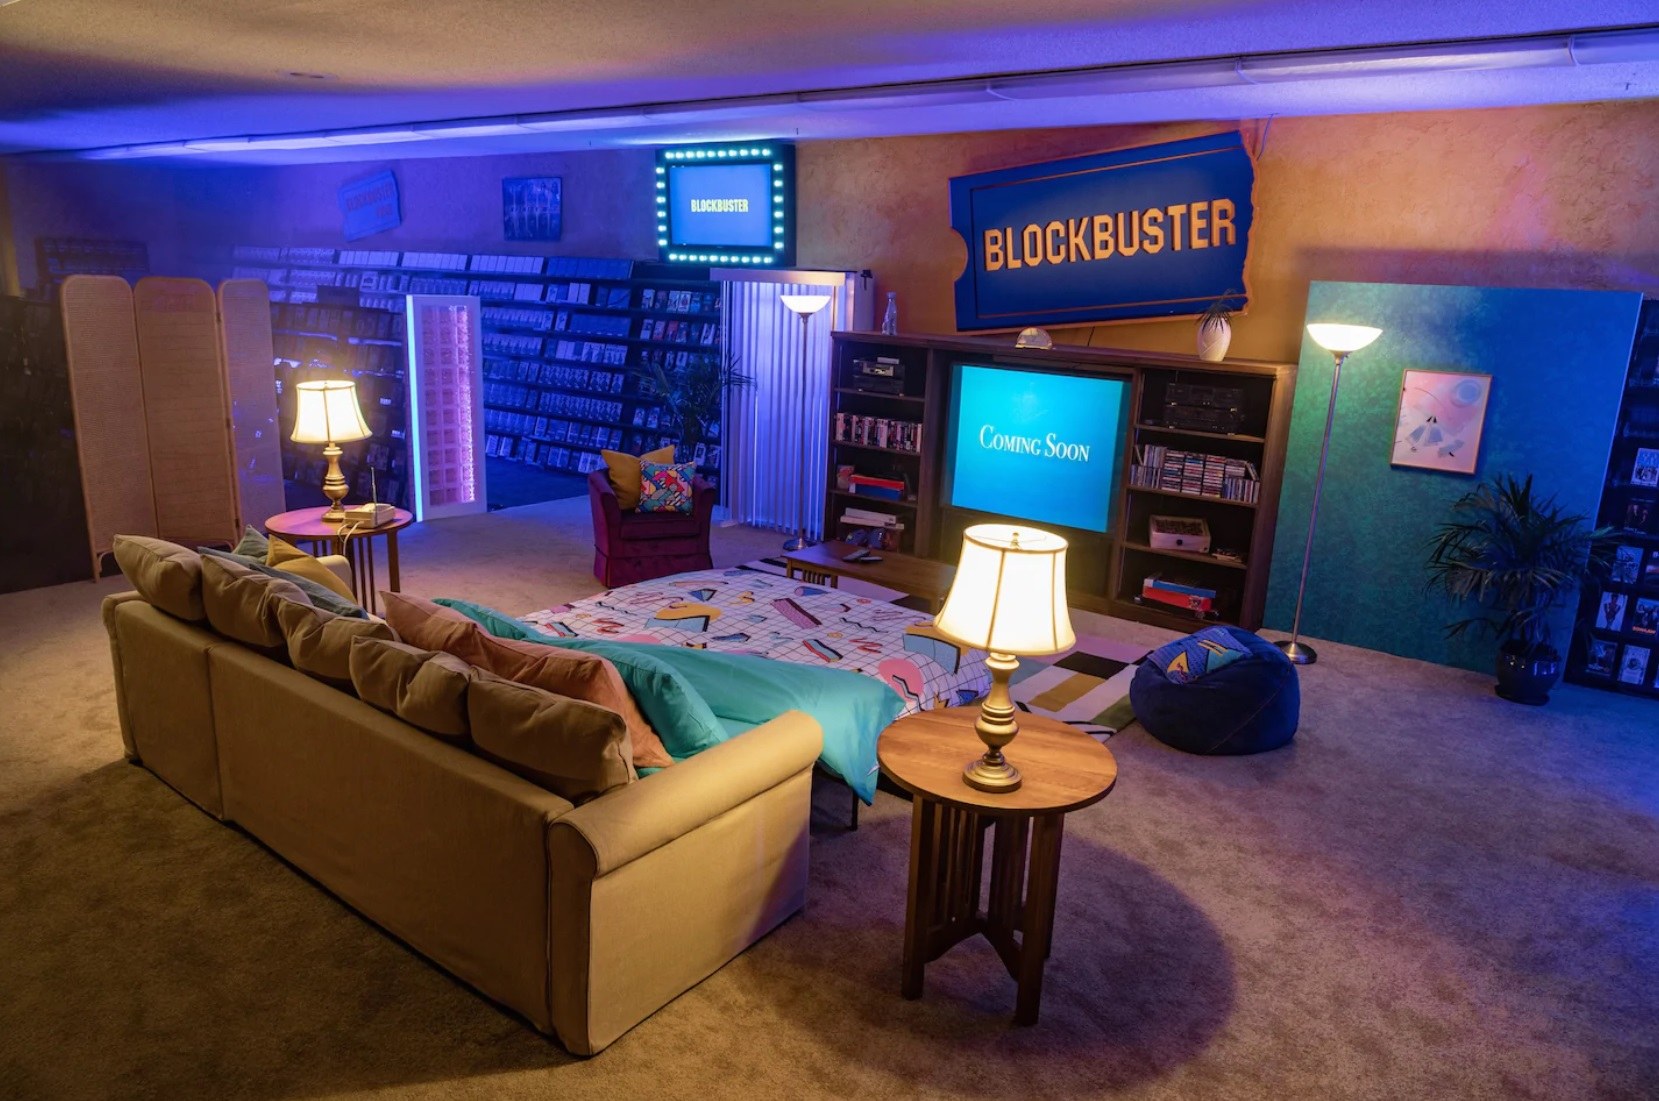 The last Blockbuster in the world is offering nineties-style sleepovers inside the store